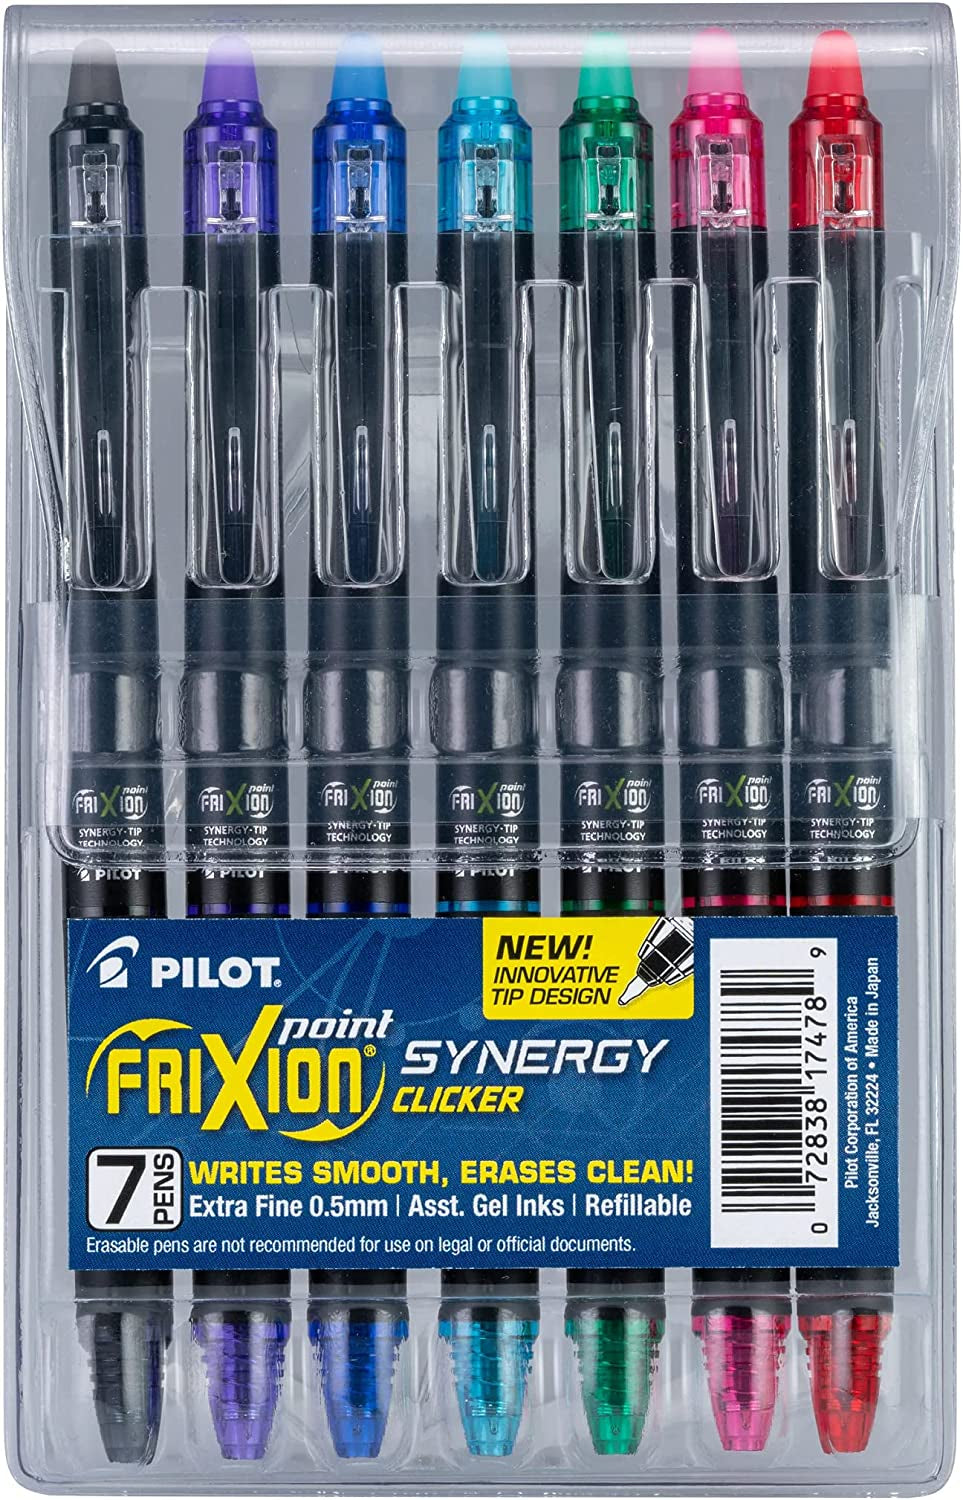 , Frixion Synergy Clicker Erasable, Refillable, Retractable Gel Ink Pens, Extra Fine Point 0.5 Mm, Pack of 7, Assorted Colors